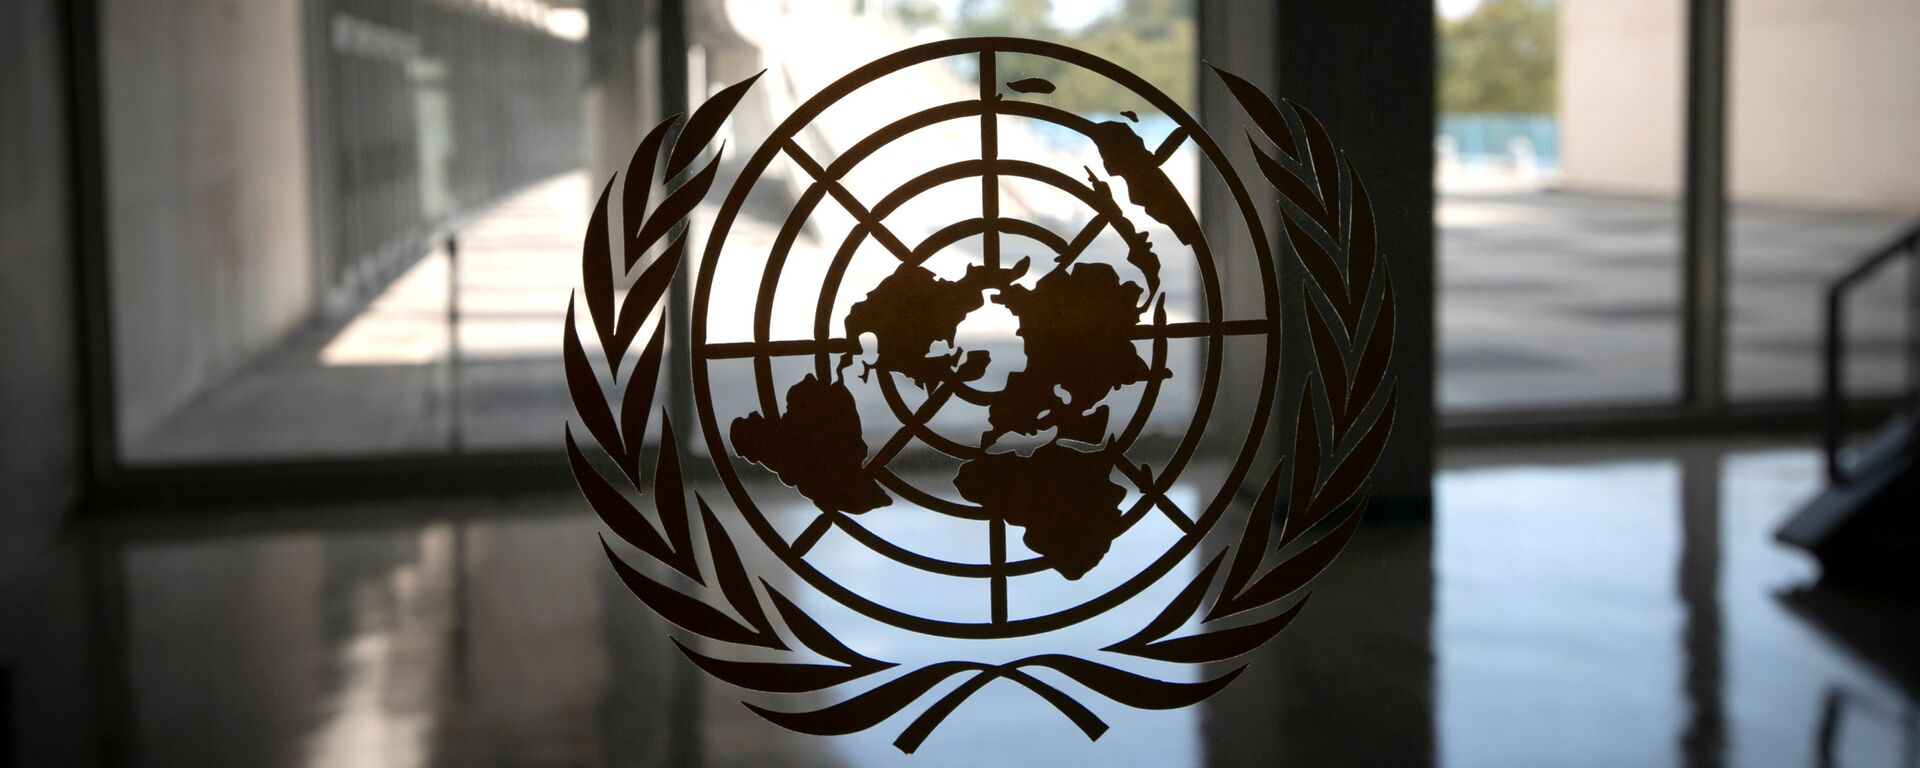 The United Nations logo is seen on a window in an empty hallway at United Nations headquarters during the 75th annual UN General Assembly high-level debate, which is being held mostly virtually due to the coronavirus disease (COVID-19) pandemic in New York, US, September 21, 2020 - Sputnik International, 1920, 20.01.2022